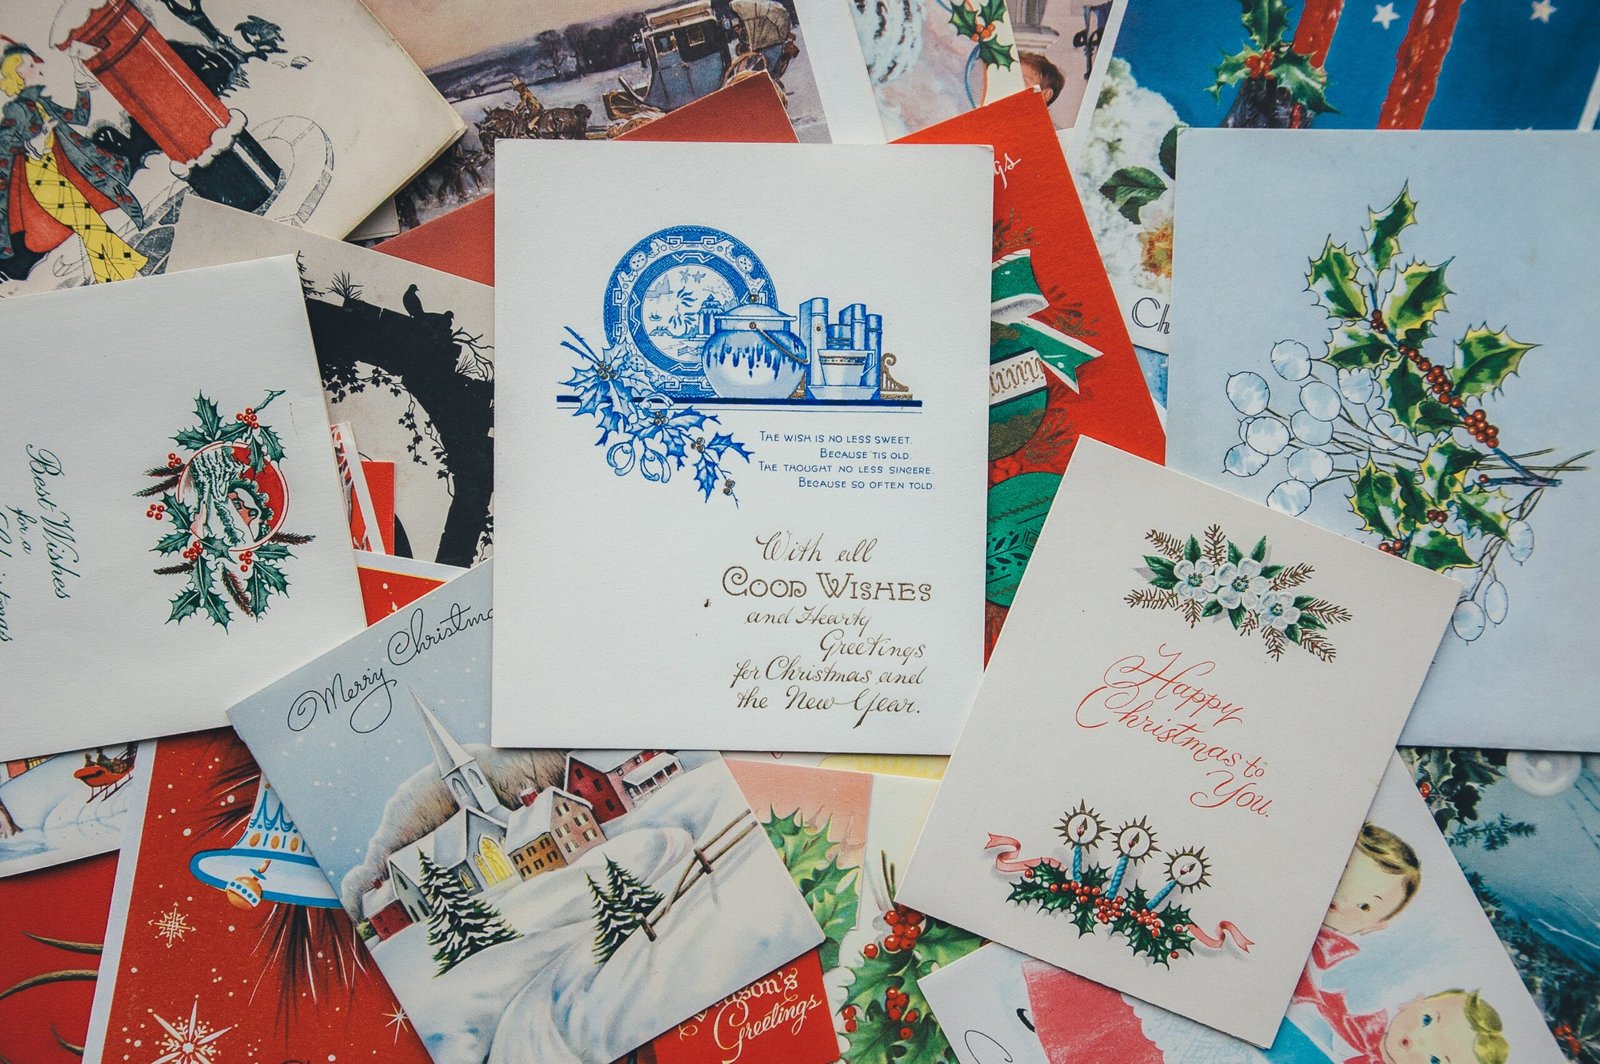 What Would You Write on the Christmas Card?